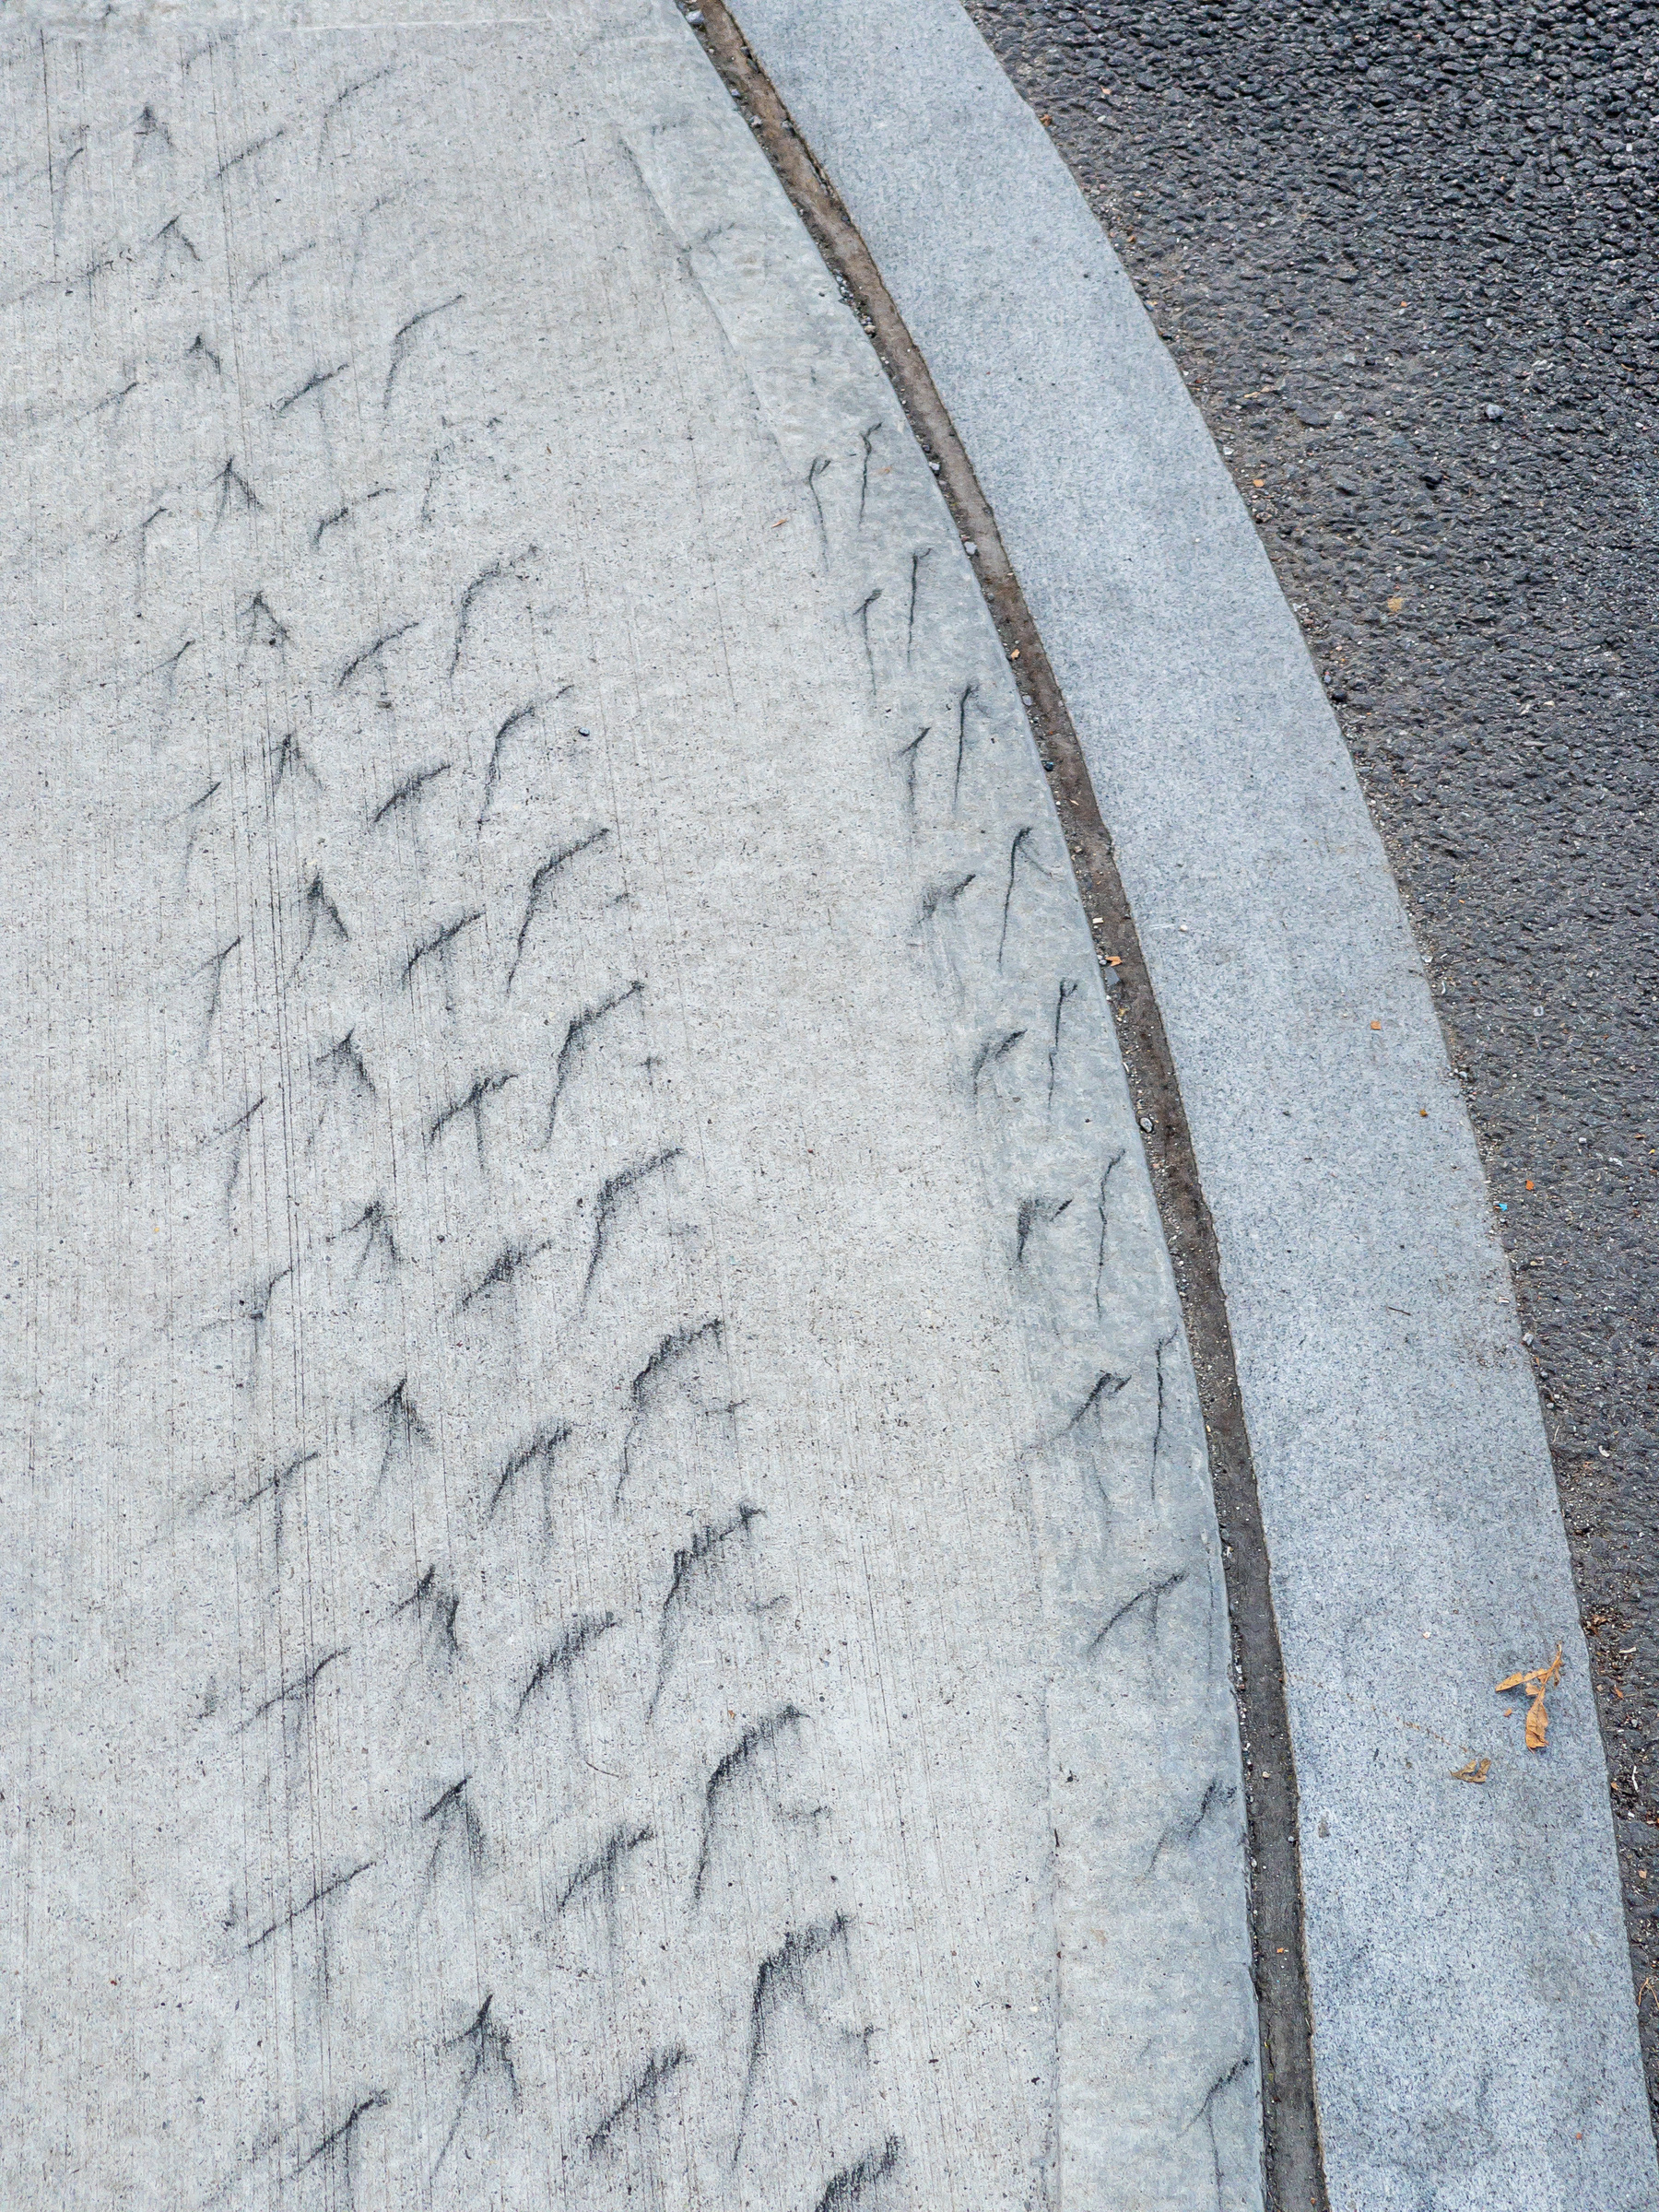 truck tire tracks on concrete sidewalk and curb. Curb running from top center to lower right in a gentle arc. Asphalt paving to the right of the curve.